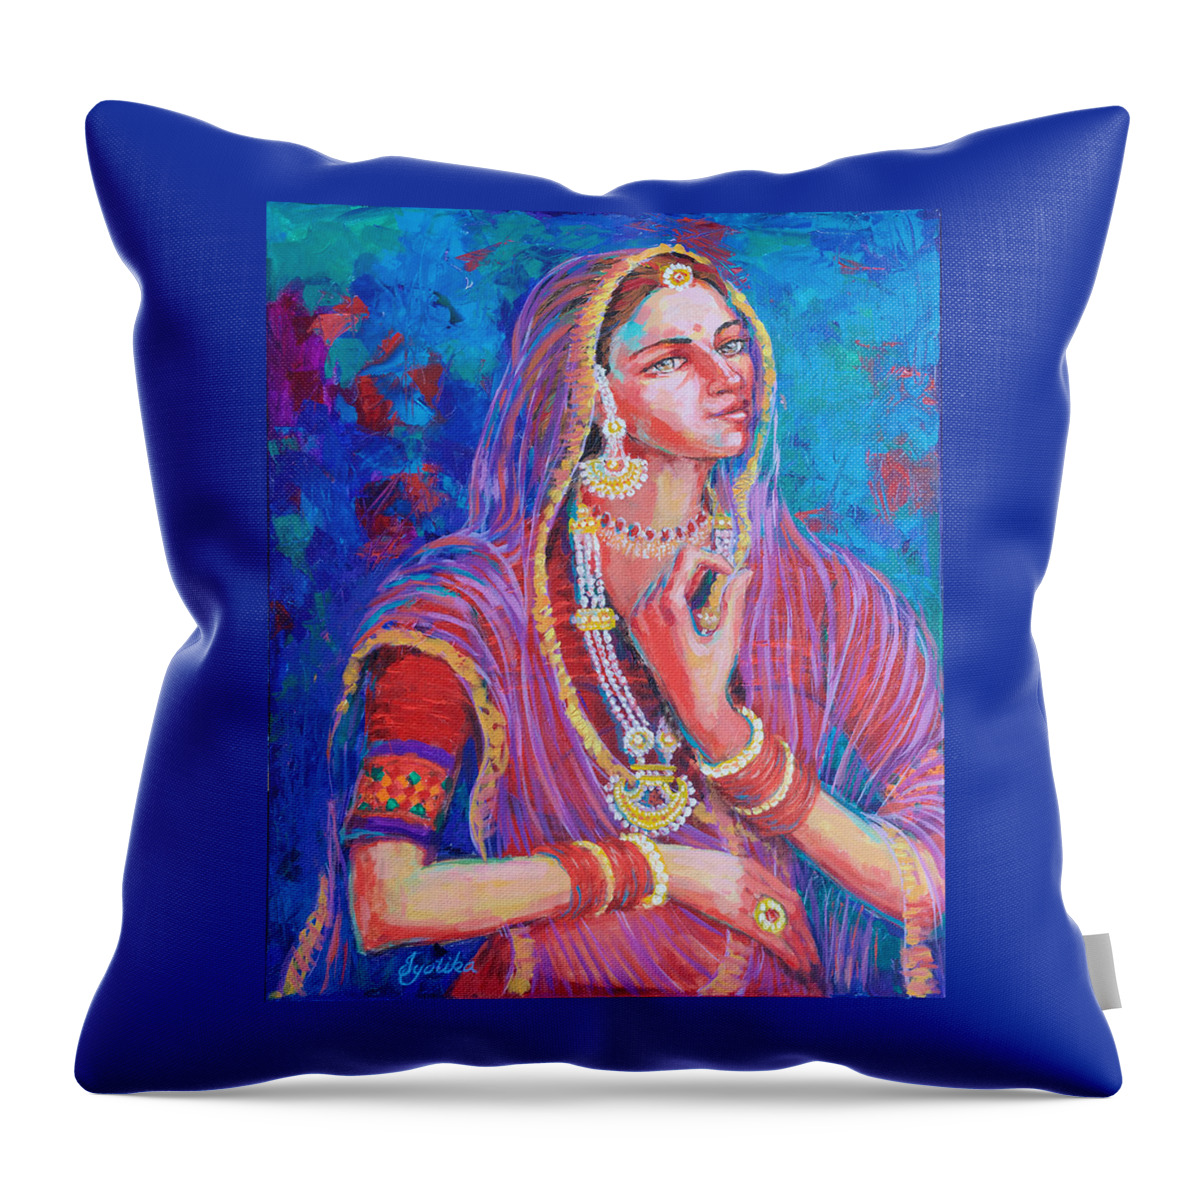 Royal Throw Pillow featuring the painting The Royal Beauty of Rajasthan by Jyotika Shroff